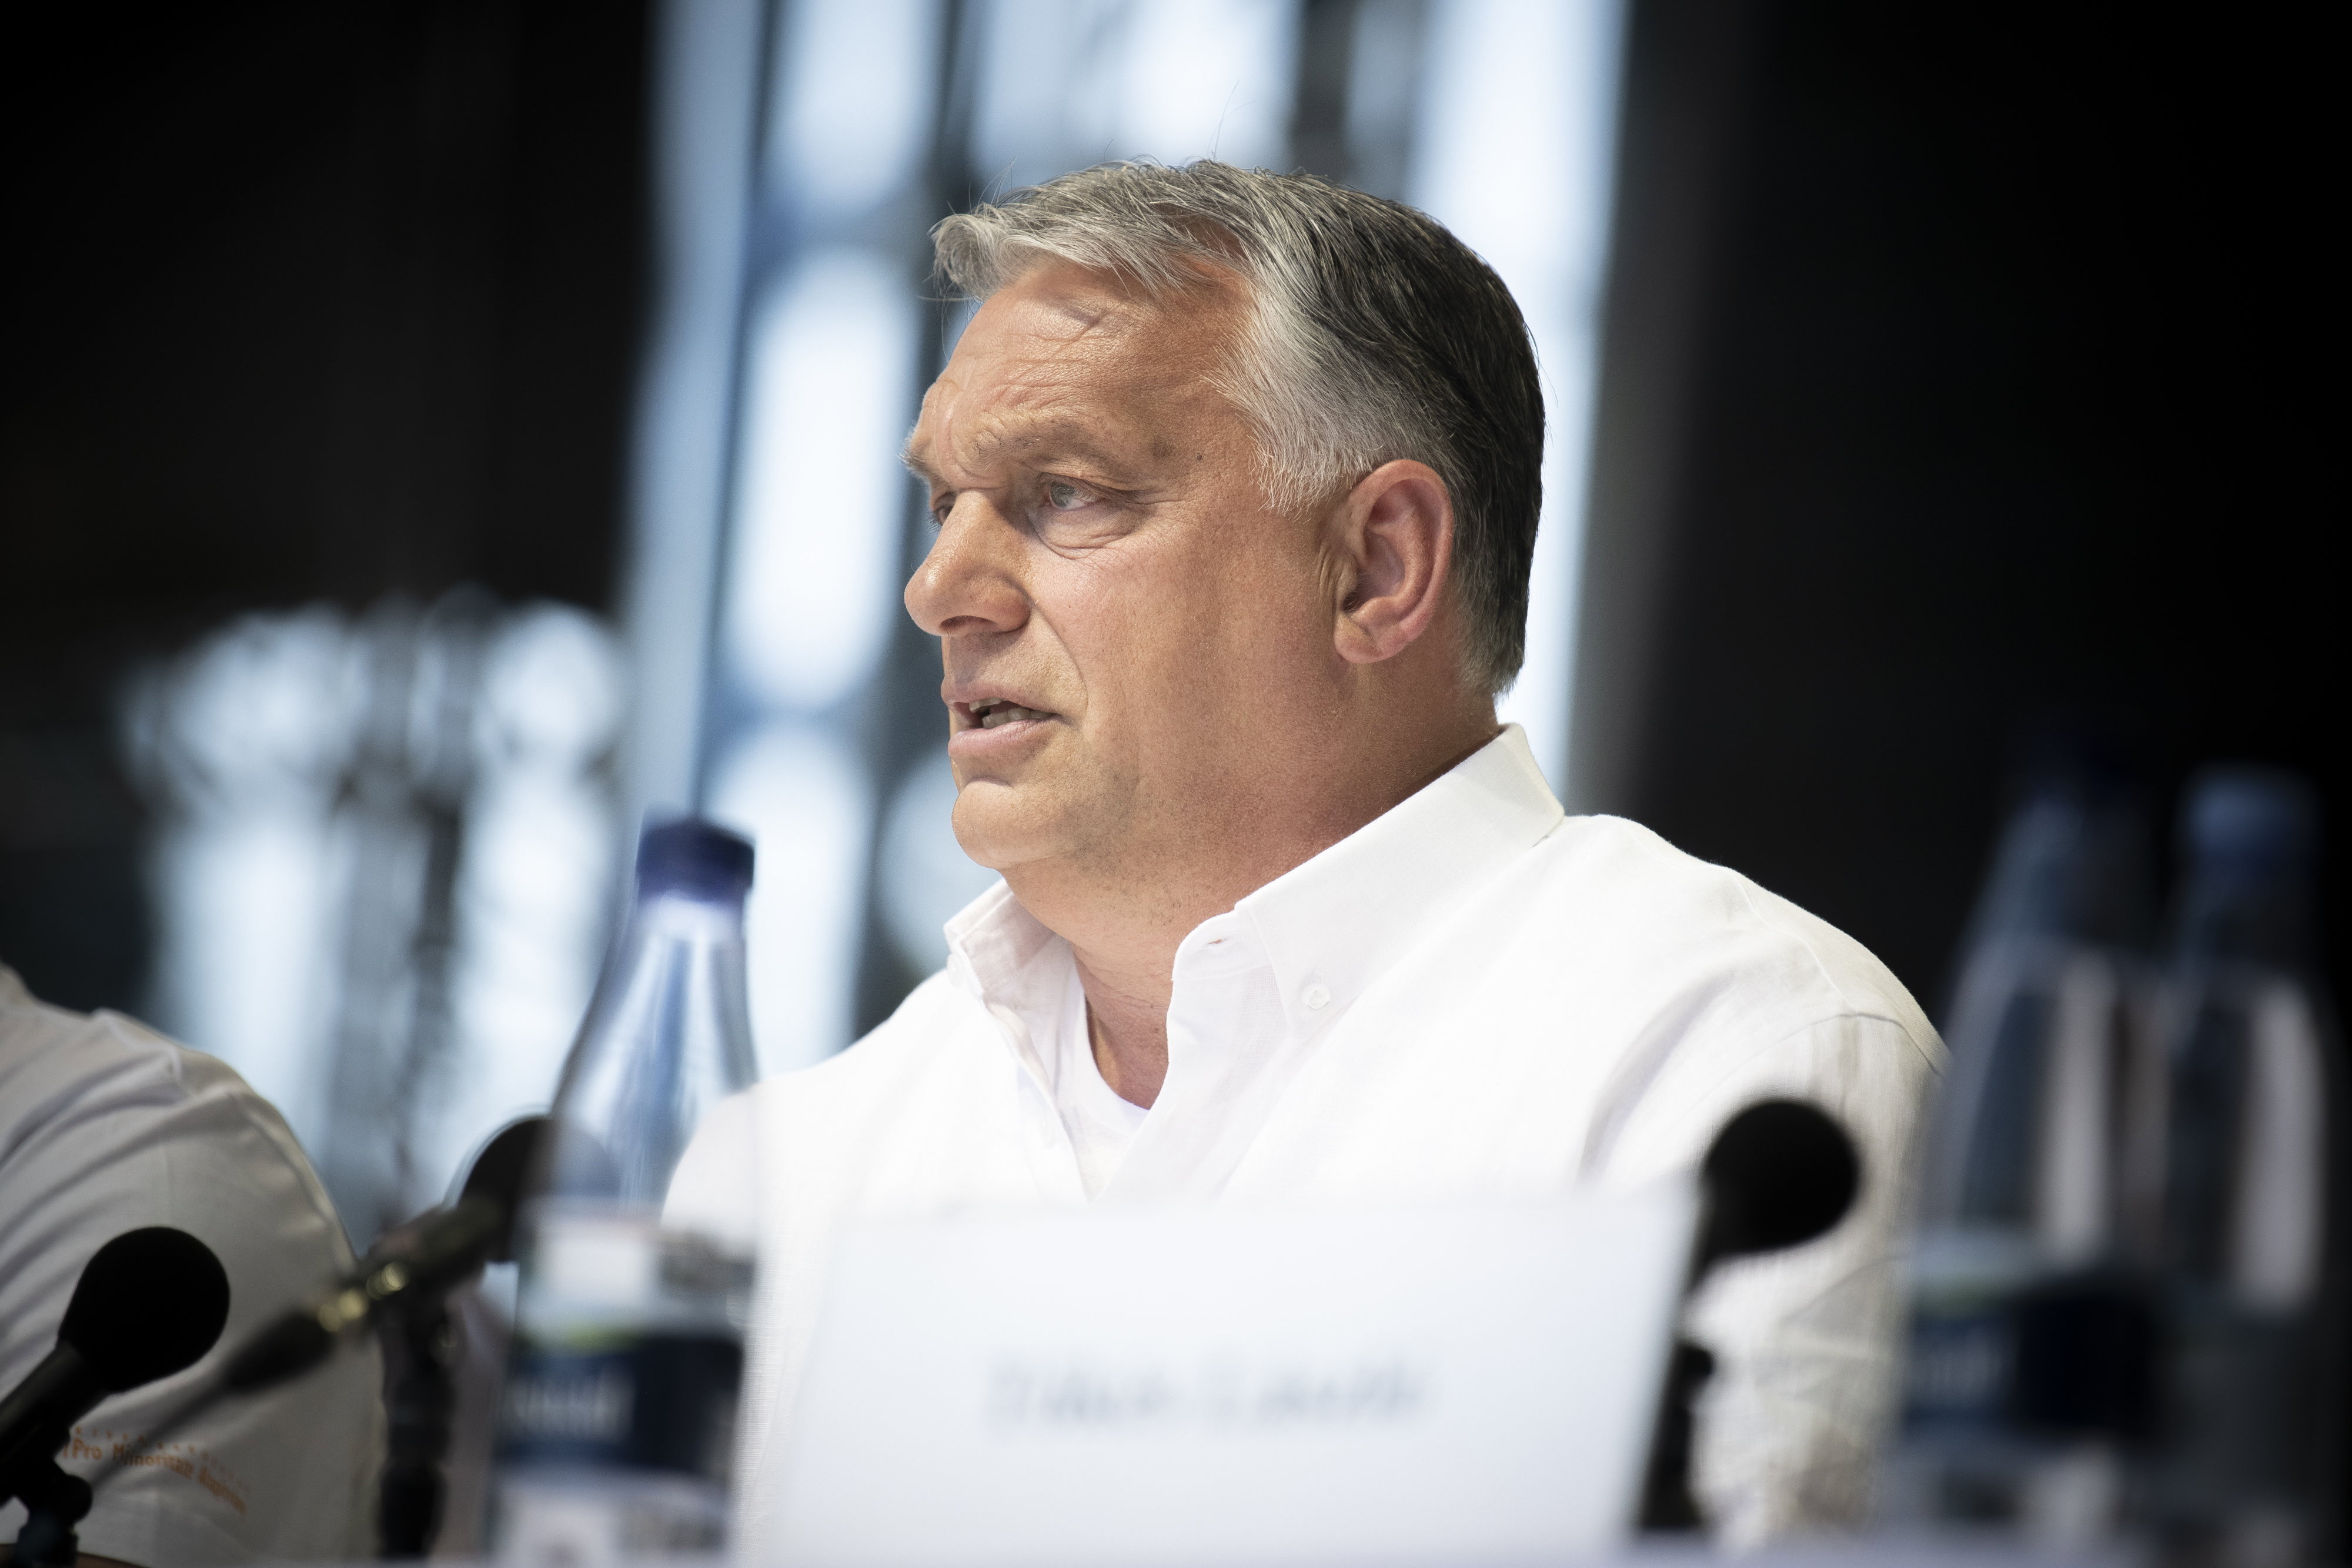 Hungarians 'do not want to become a mixed race', Orbán says